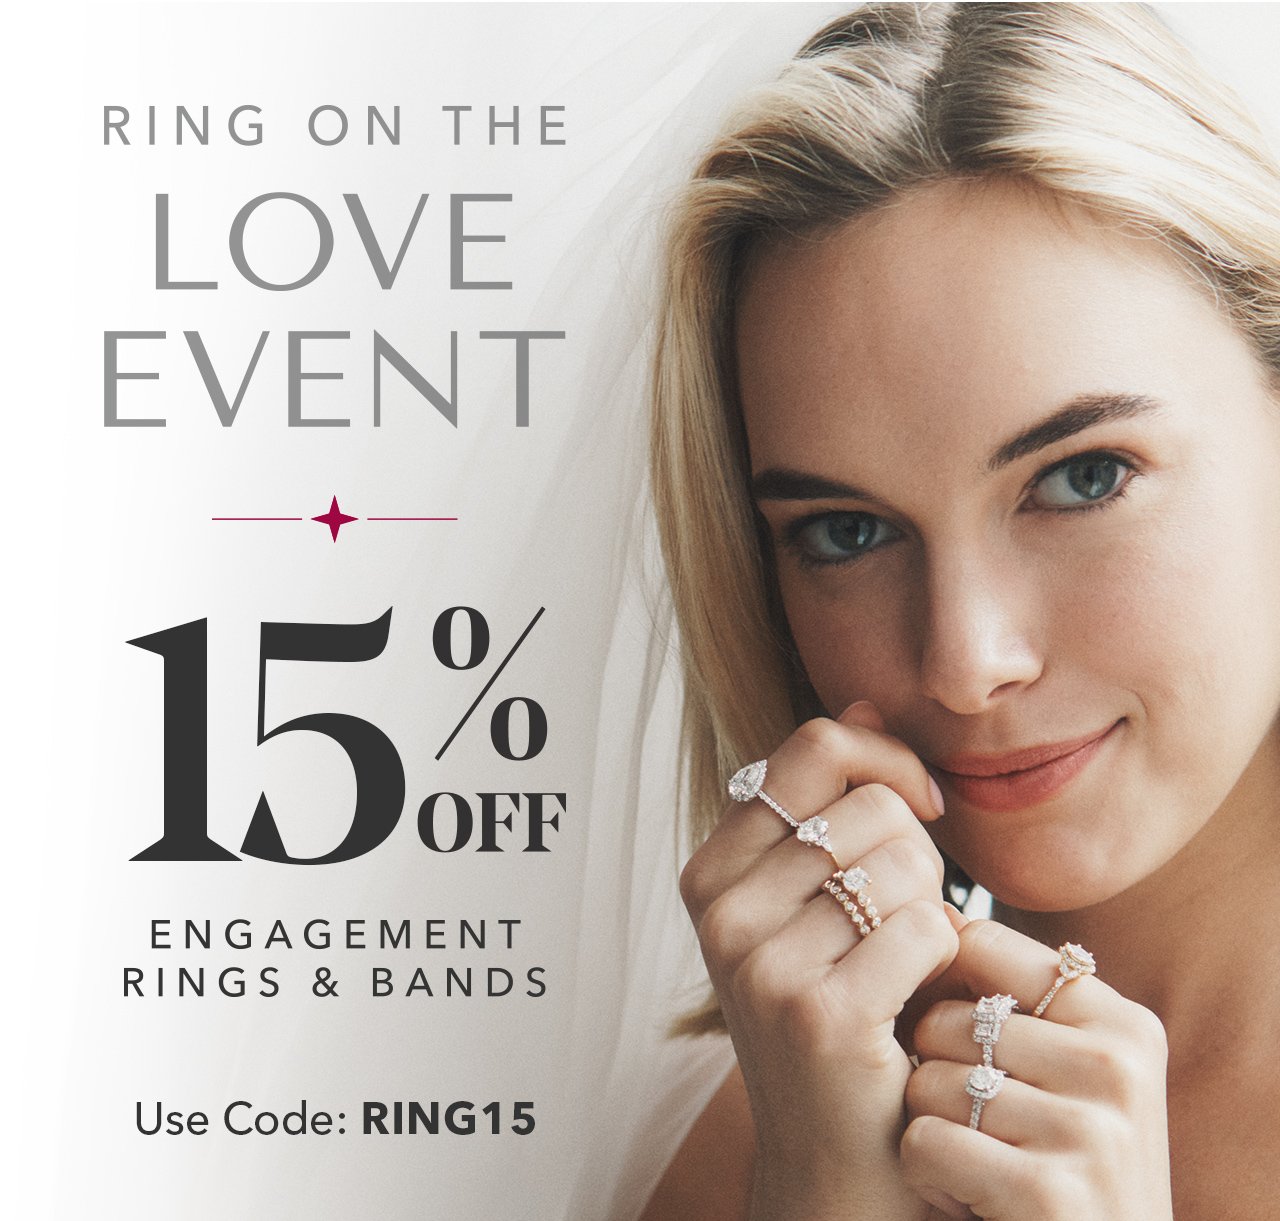 Ring on the Love Event | 15% Off Engagement Rings & Bands with code: RING15